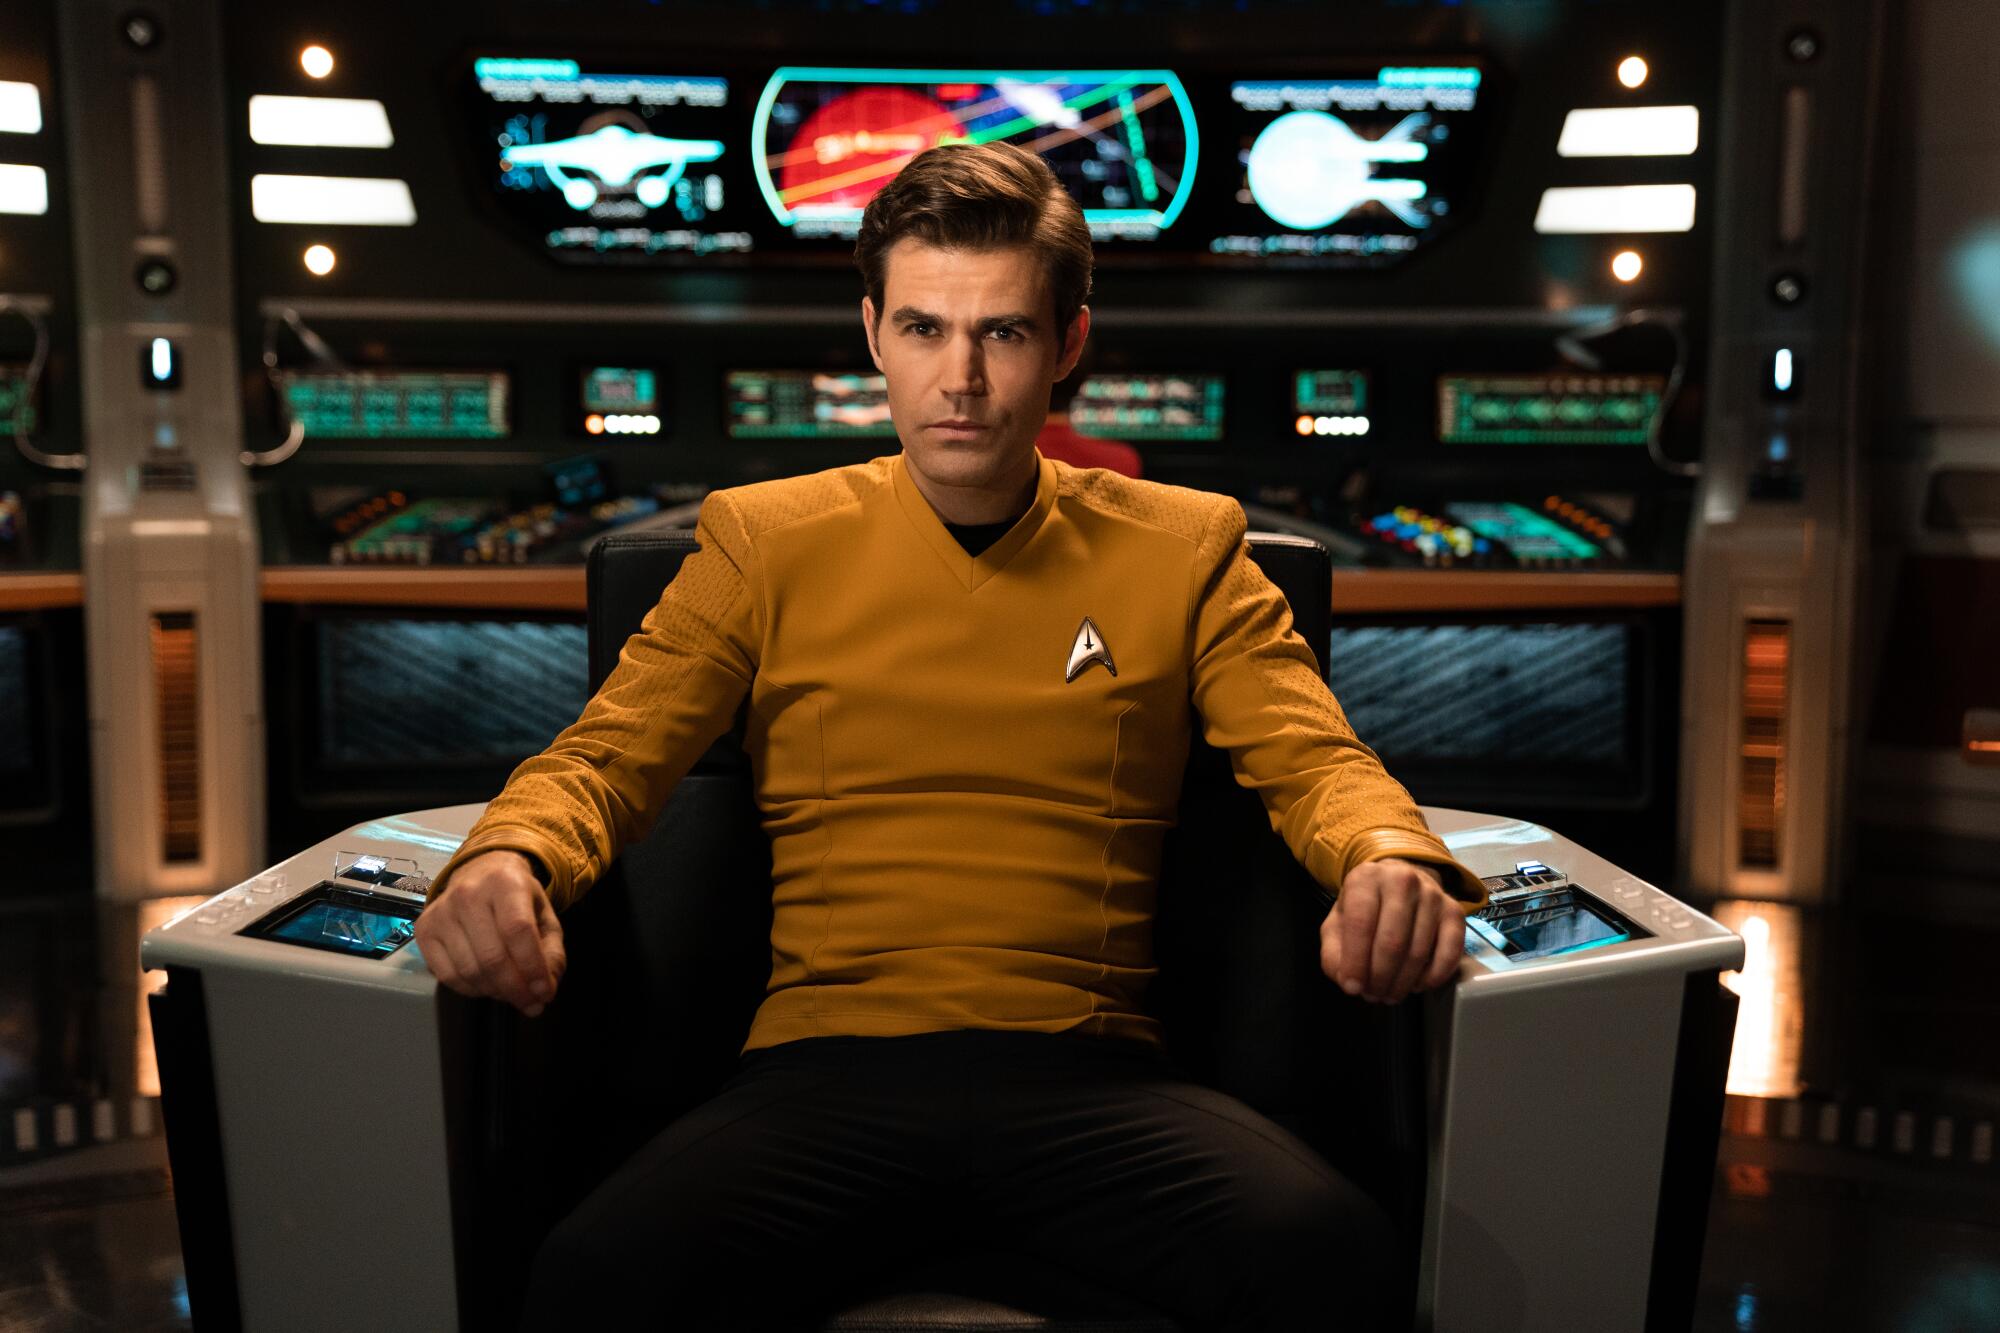 James T. Kirk sits in a chair on a spaceship with lit screens displayed behind him.